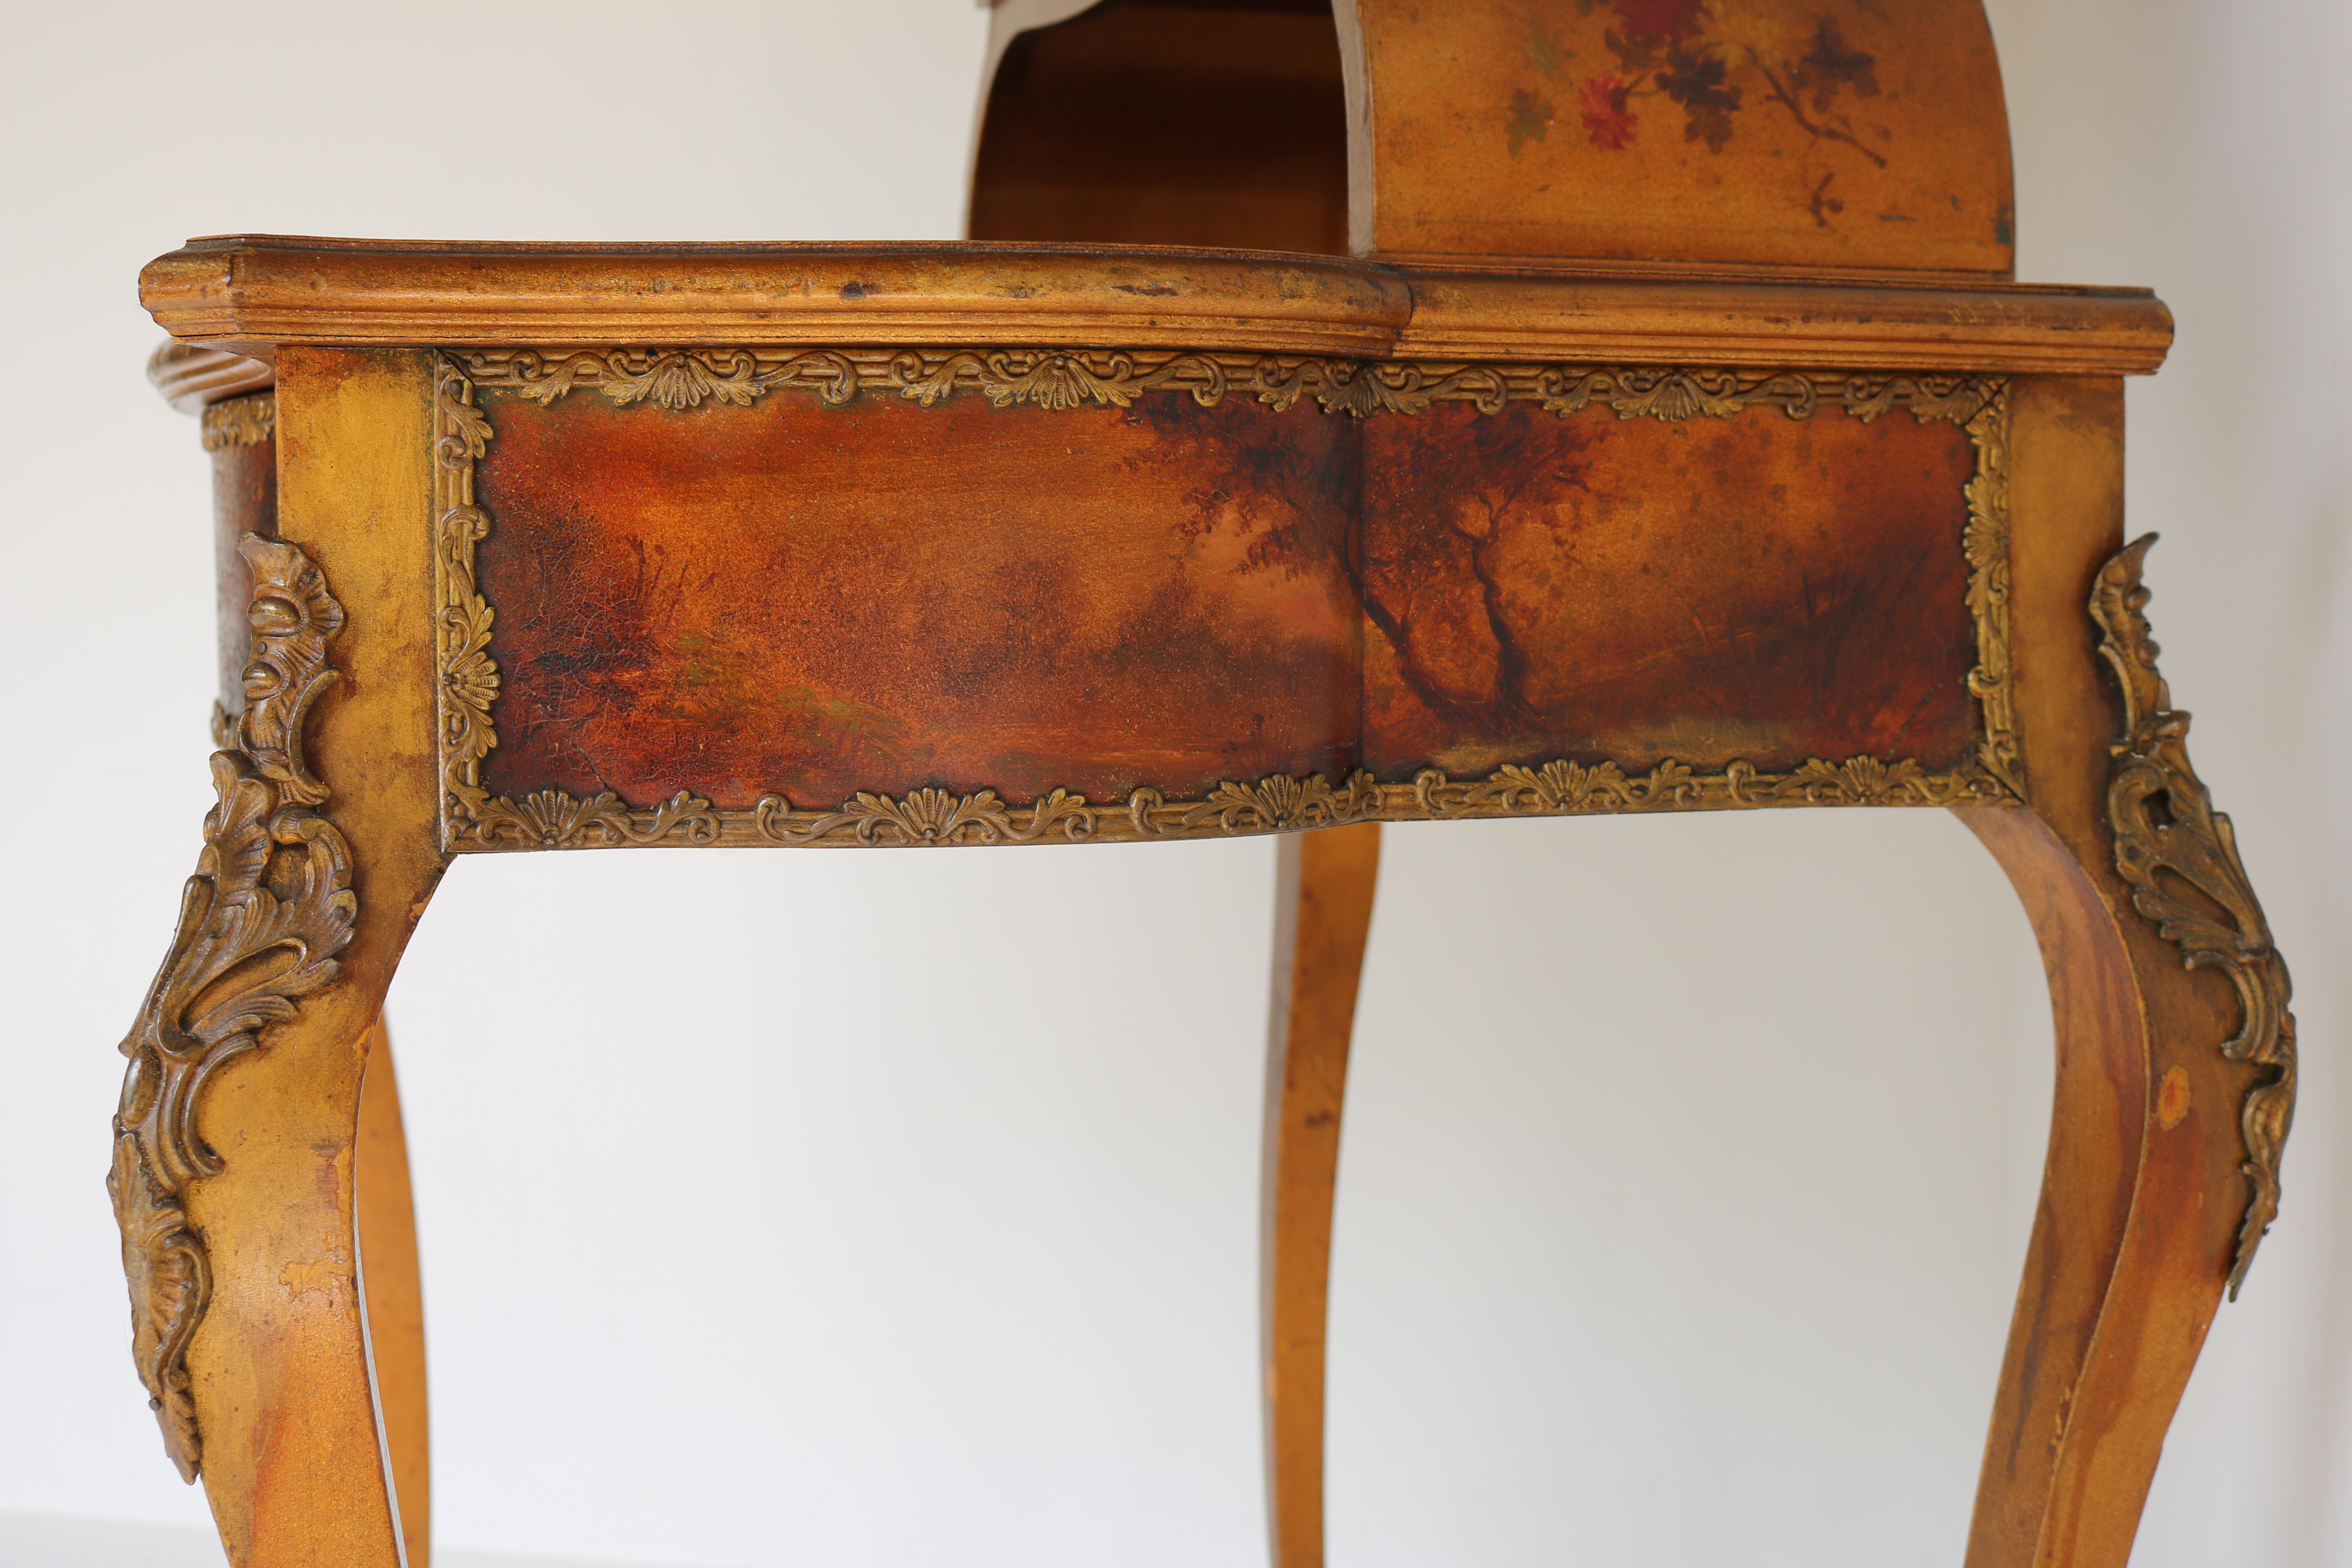 Bronze Italian Renaissance Dressing Table 19th Century Hand Painted by Müller Morten For Sale